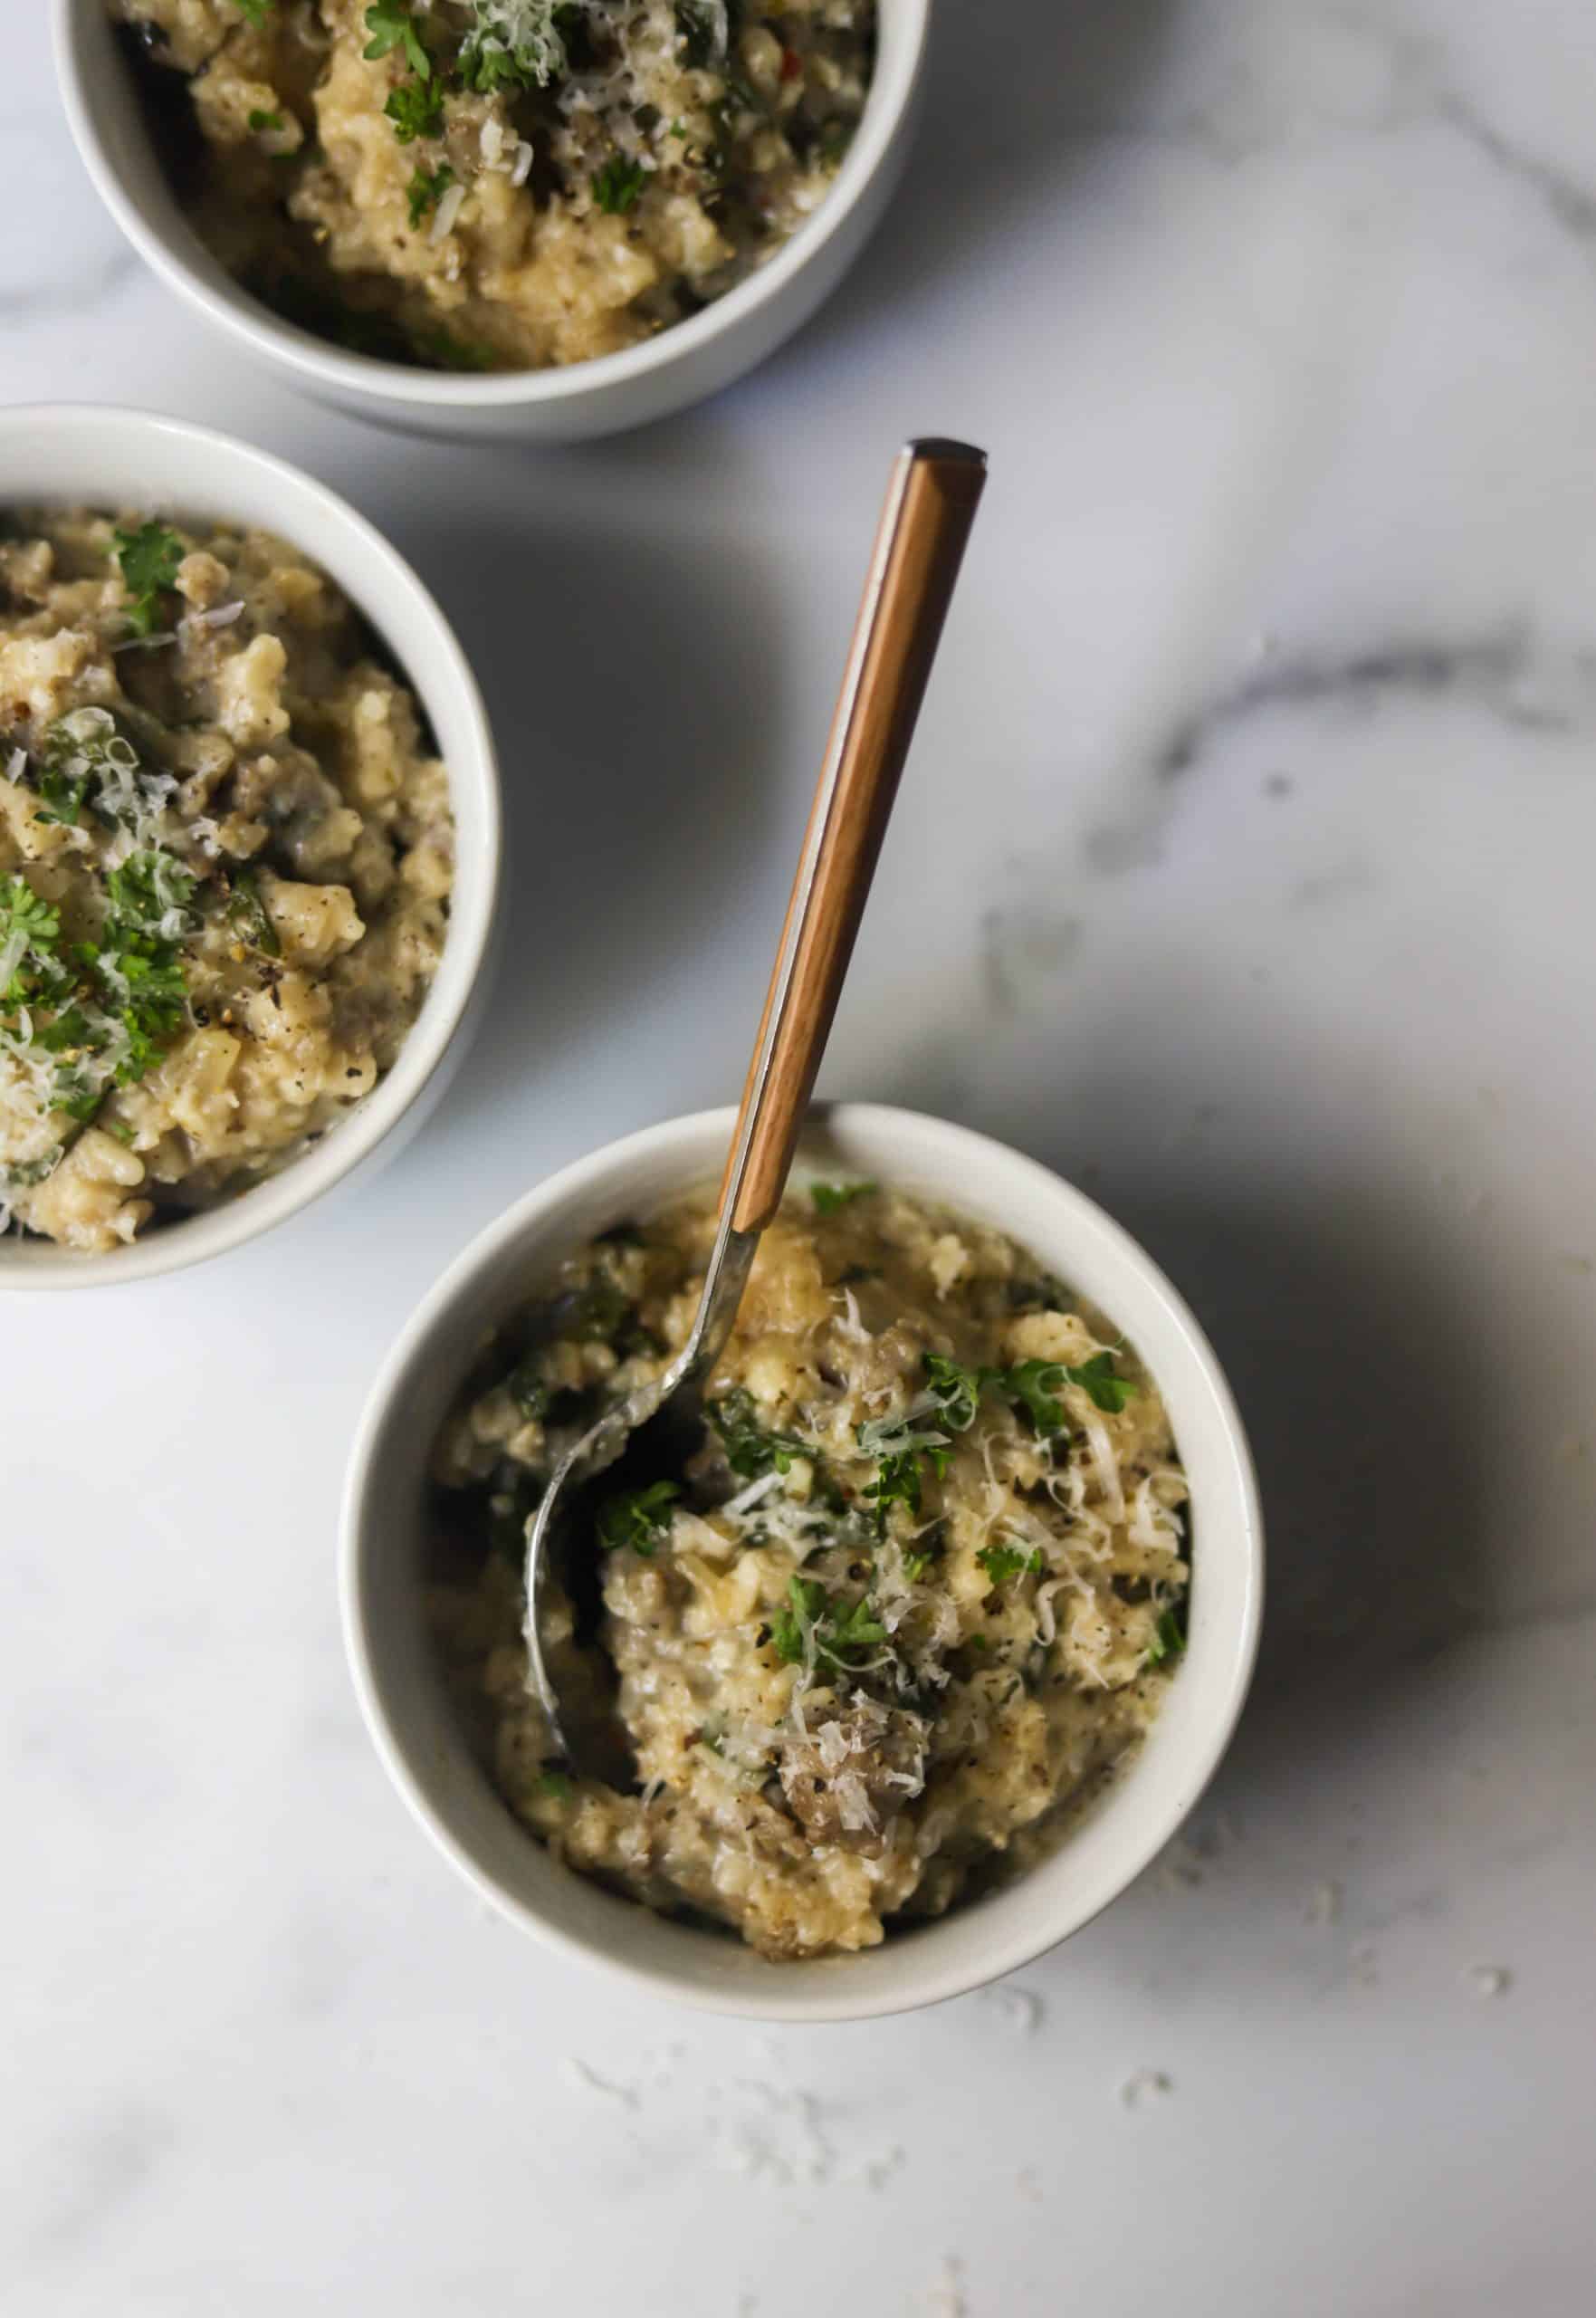 Bowls of risotto on a marble backdrop.